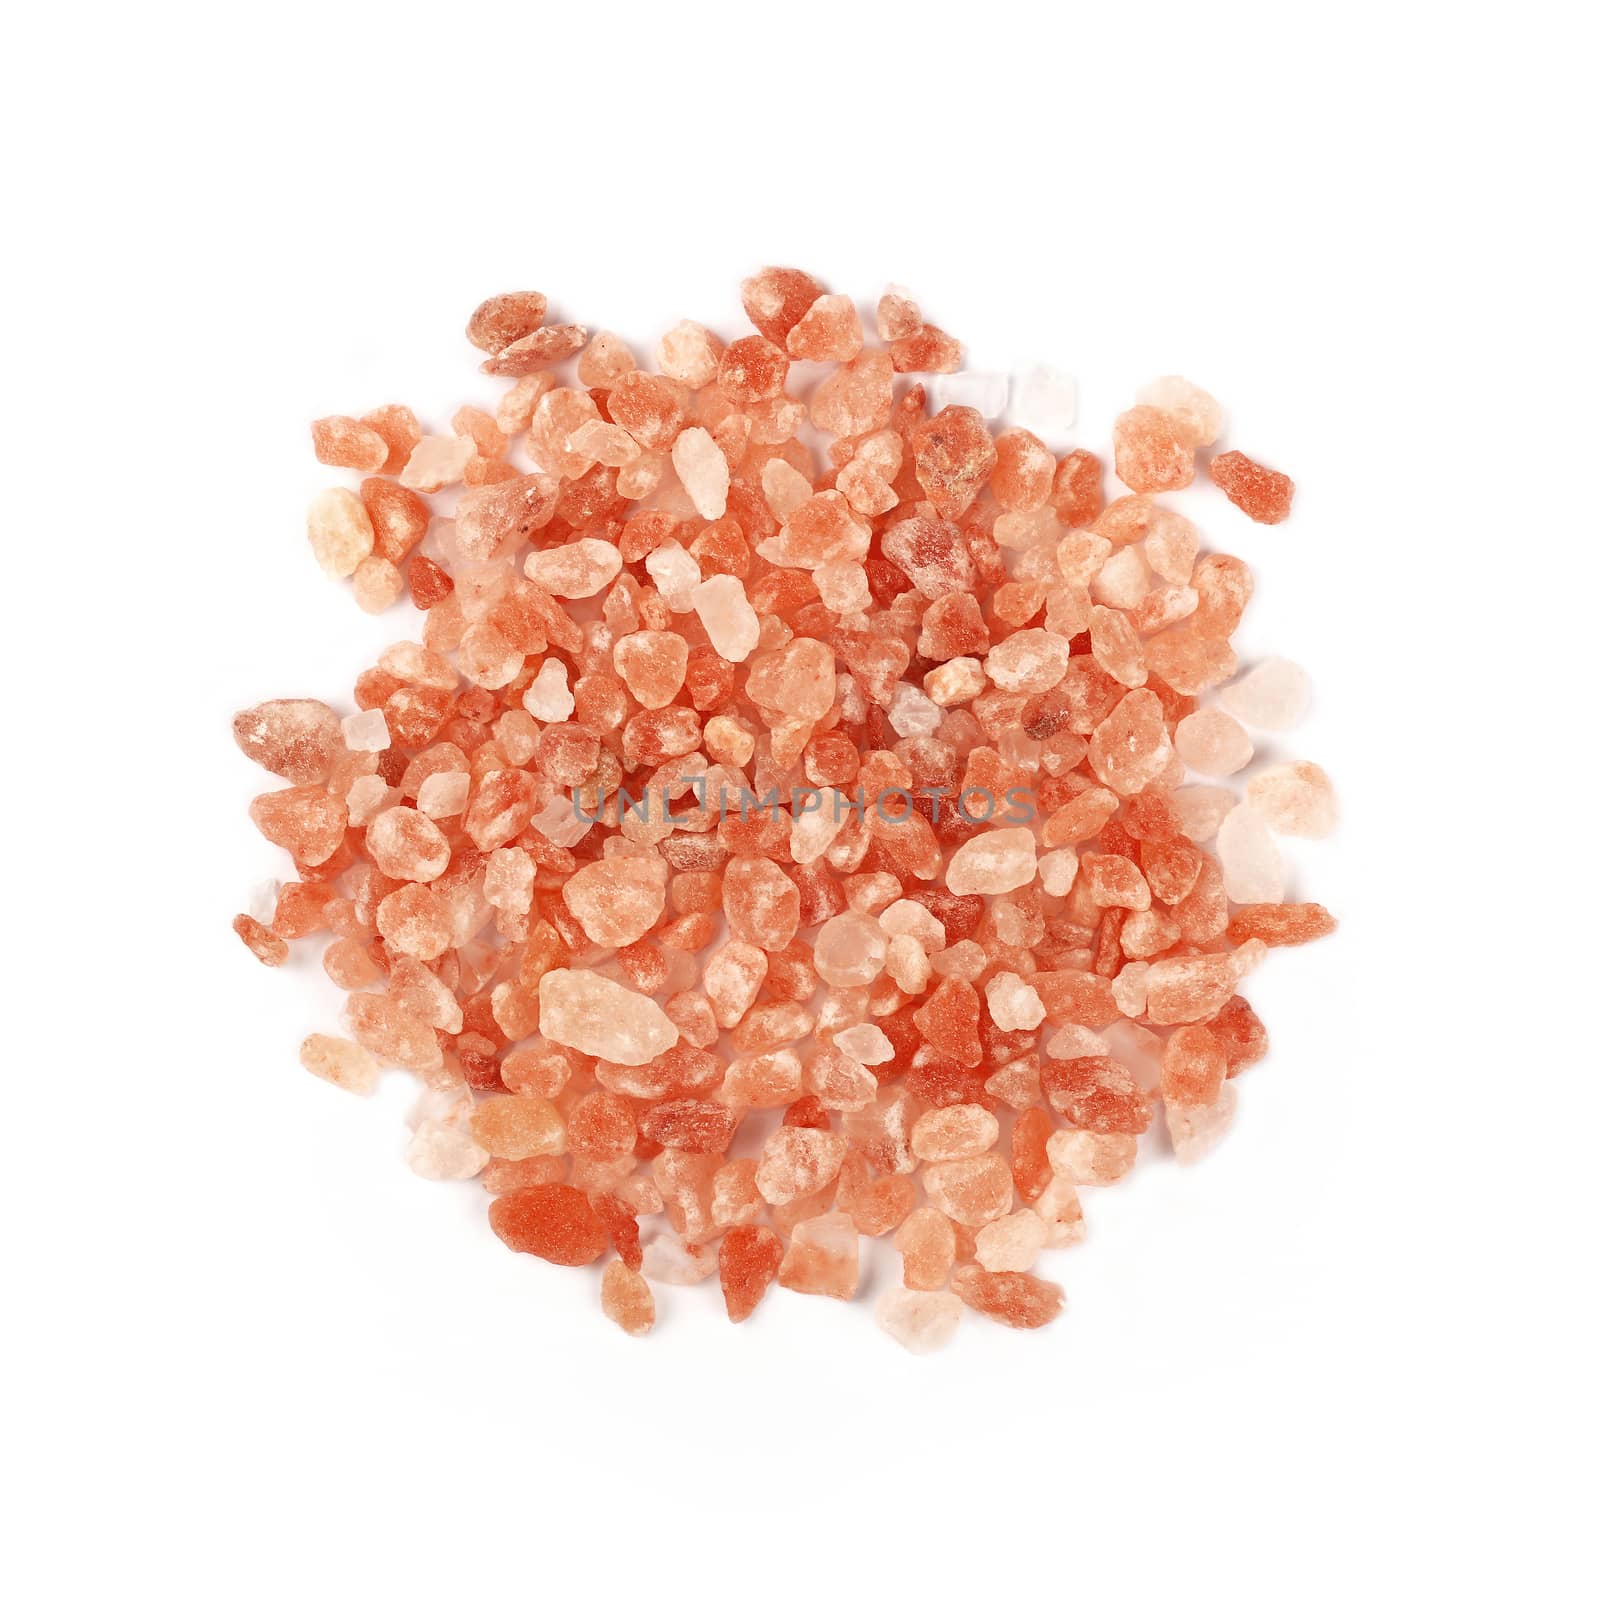 Close up one portion, heap of large crystals pink Himalayan salt isolated on white background, elevated top view, directly above